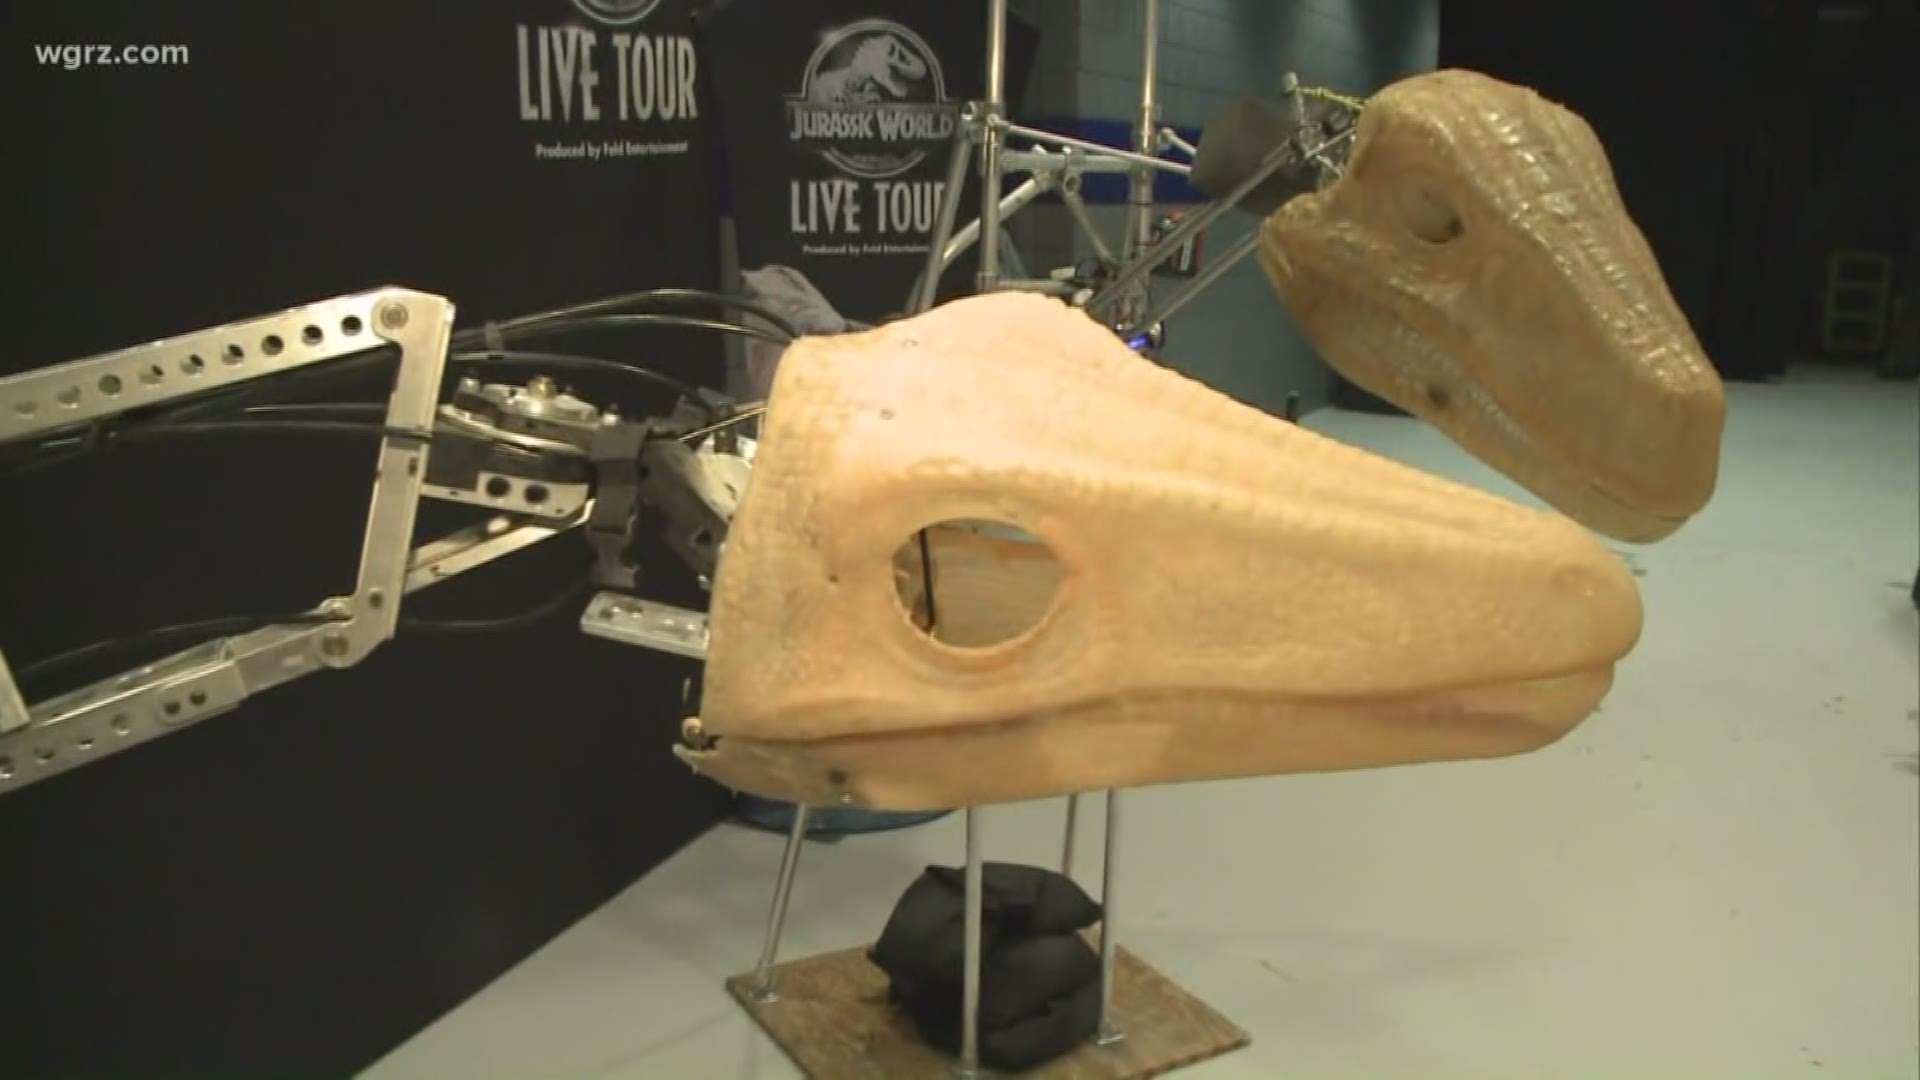 Meet the dino-teers of the 'Jurassic World Live' show